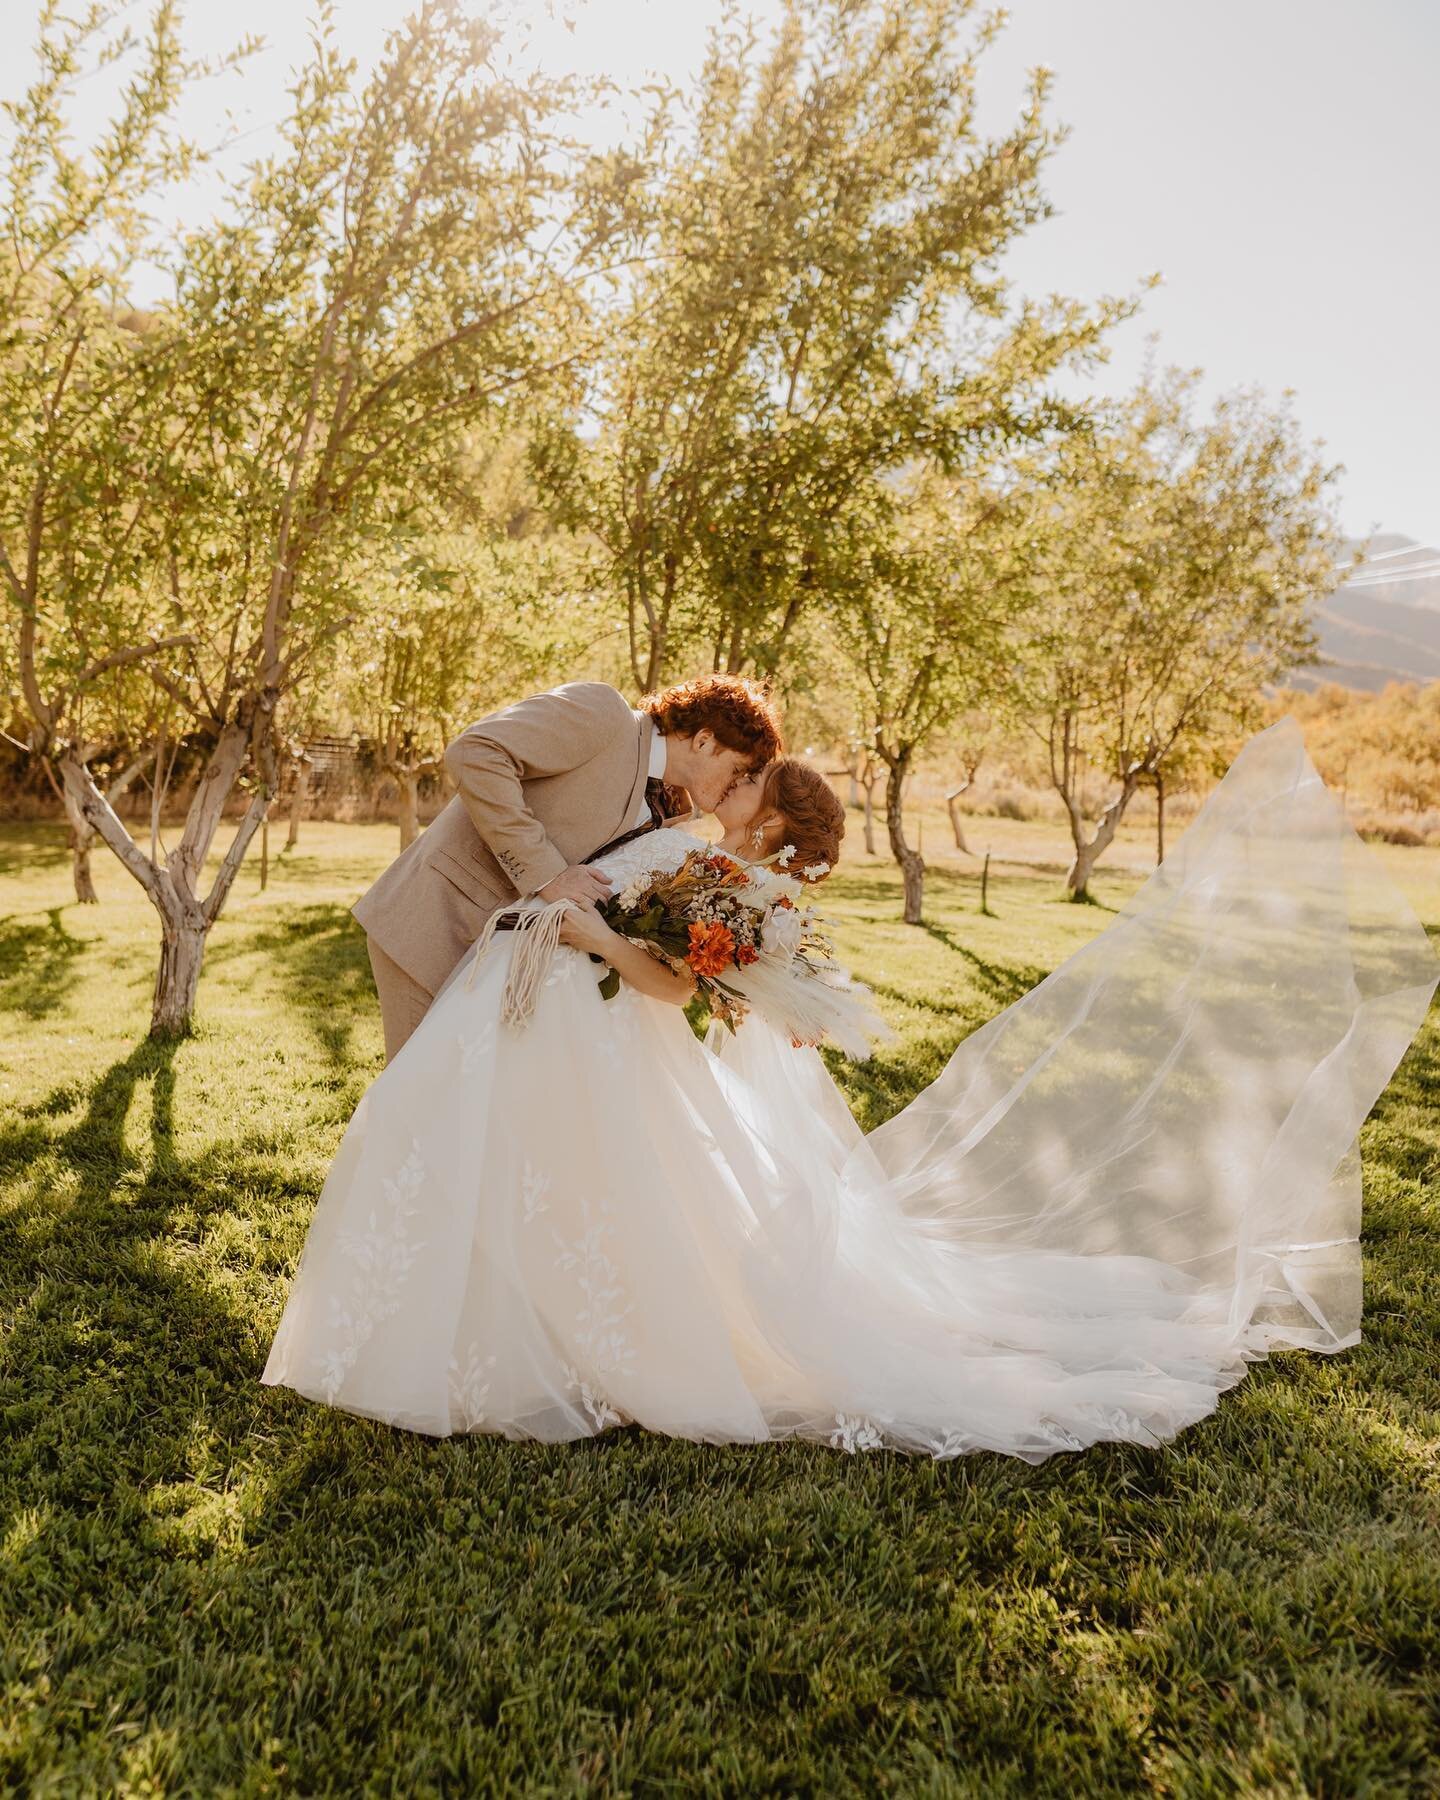 Fall wedding magic 🤍🍁✨

Such a joy to capture this sweet wedding 🥹 I&rsquo;m so grateful to be such a special part of the most wonderful days ✨

#utahweddingphotographer #utahelopementphotographer #pnwphotographer #pnwweddingphotographer #utahwedd